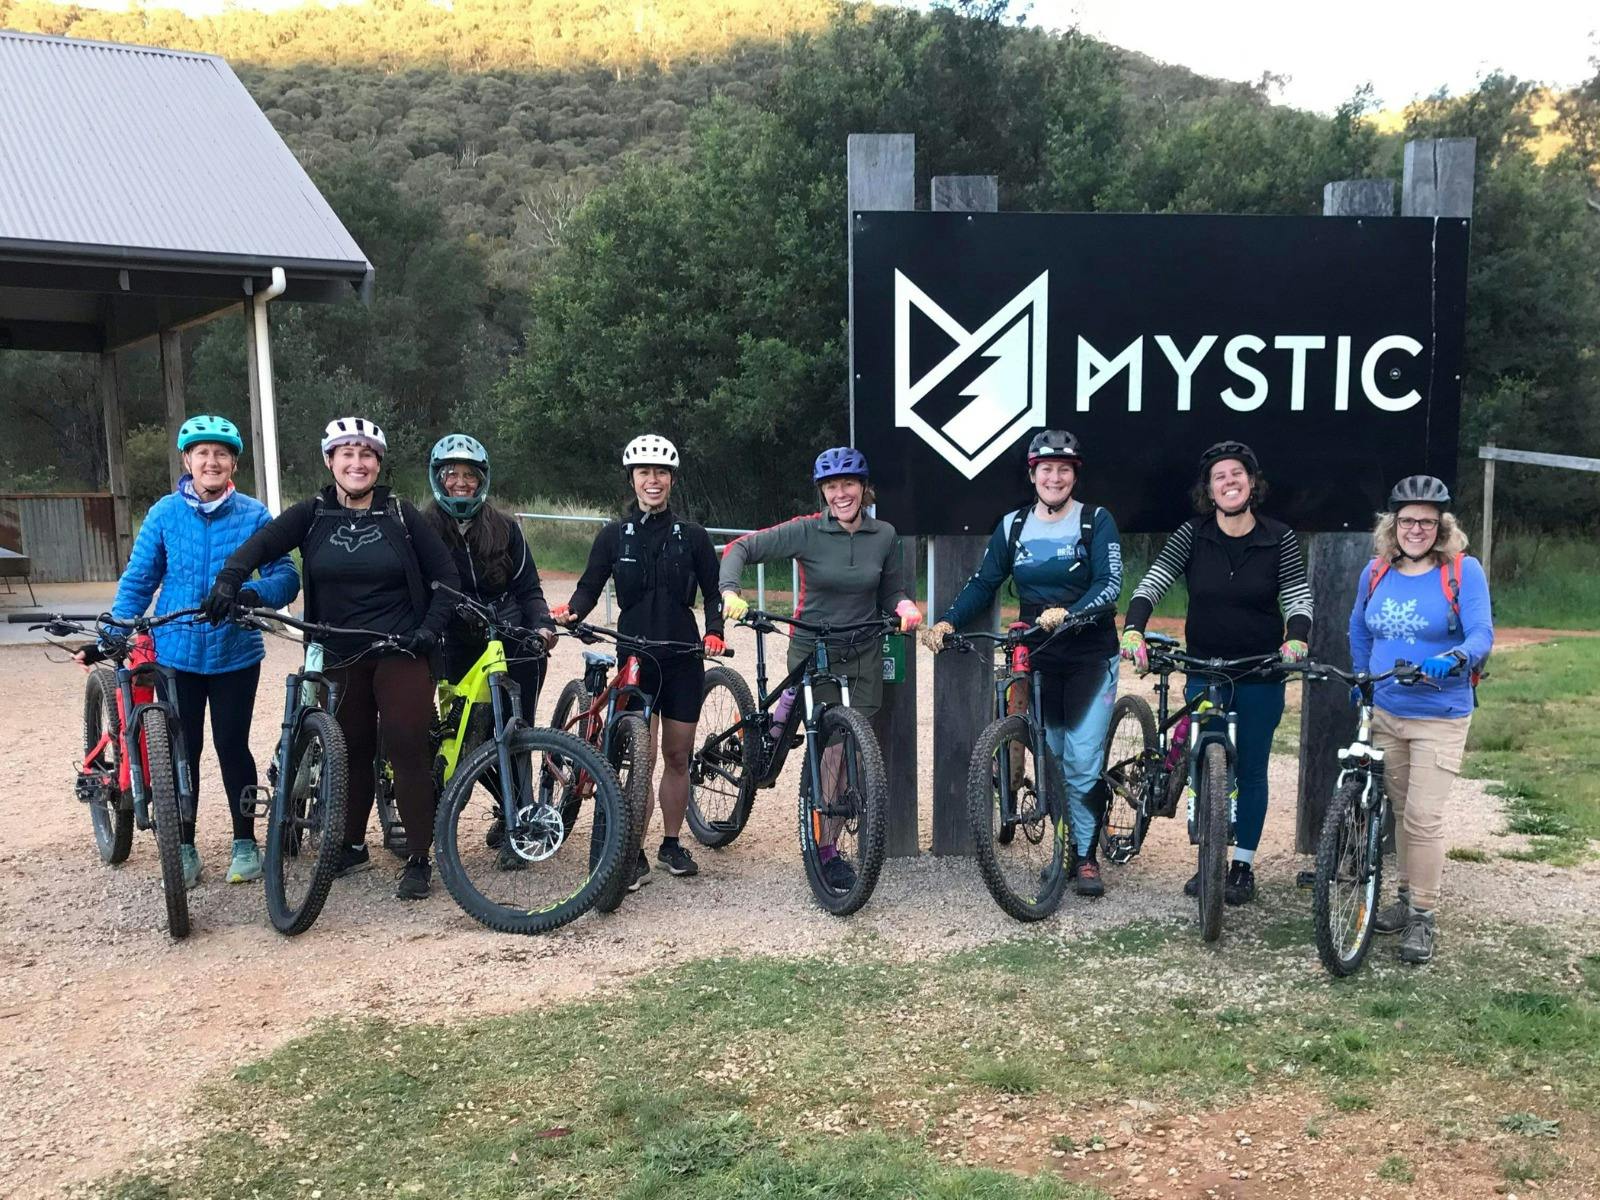 A group of women with bikes stand in front of a black sign that reads MYSTIC.